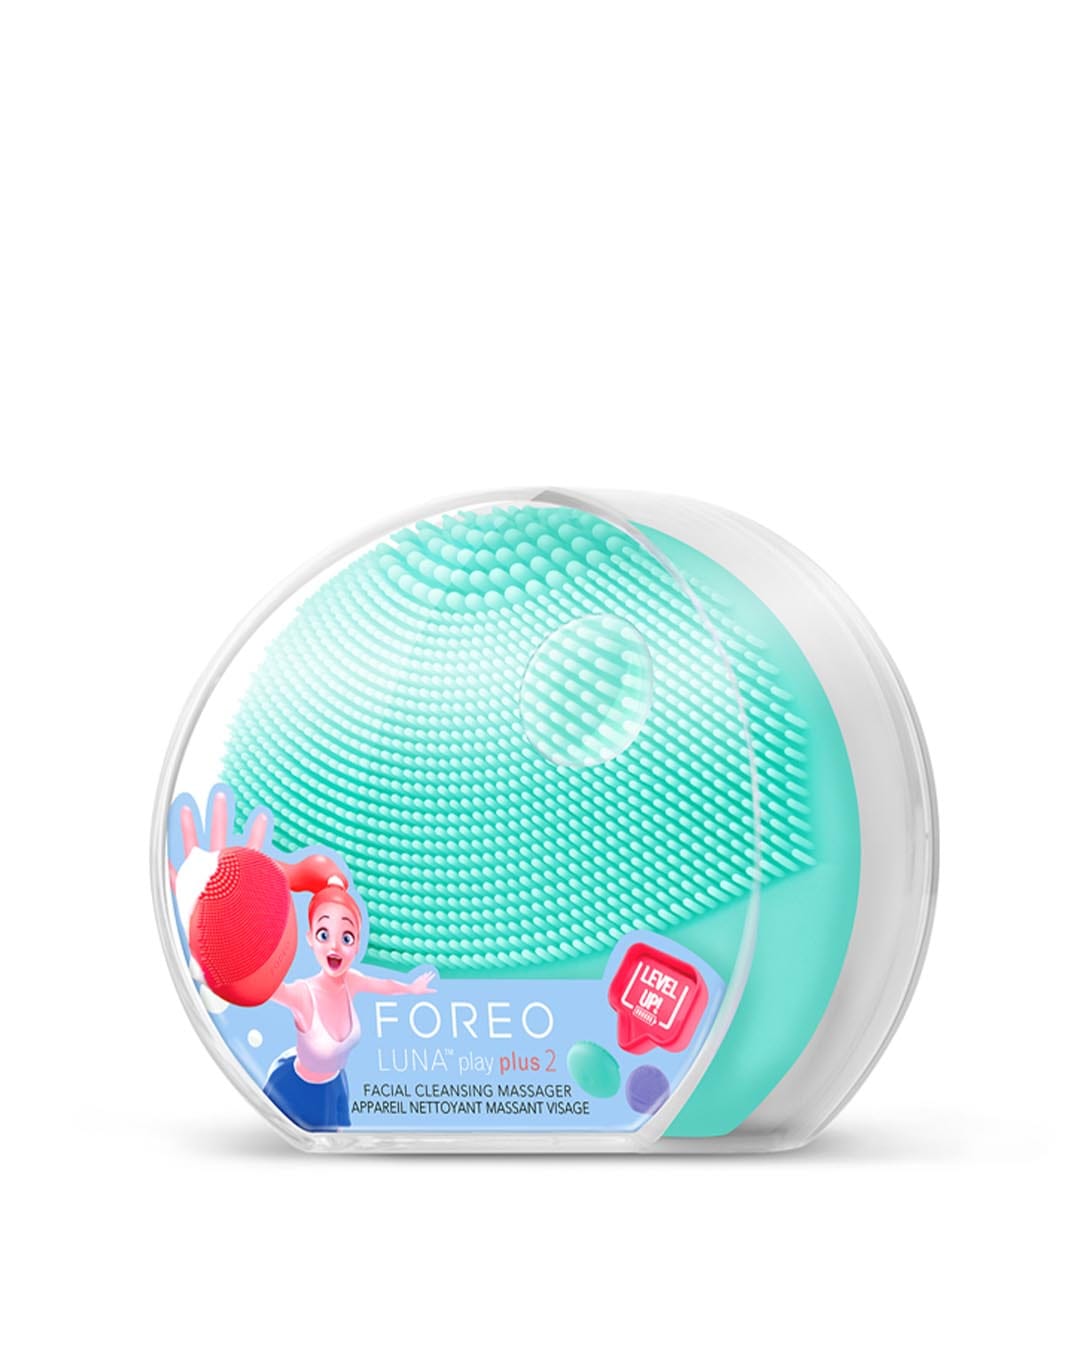 FREE Foreo Luna Play Plus 2 Minty Cool! Cleansing Device worth £28